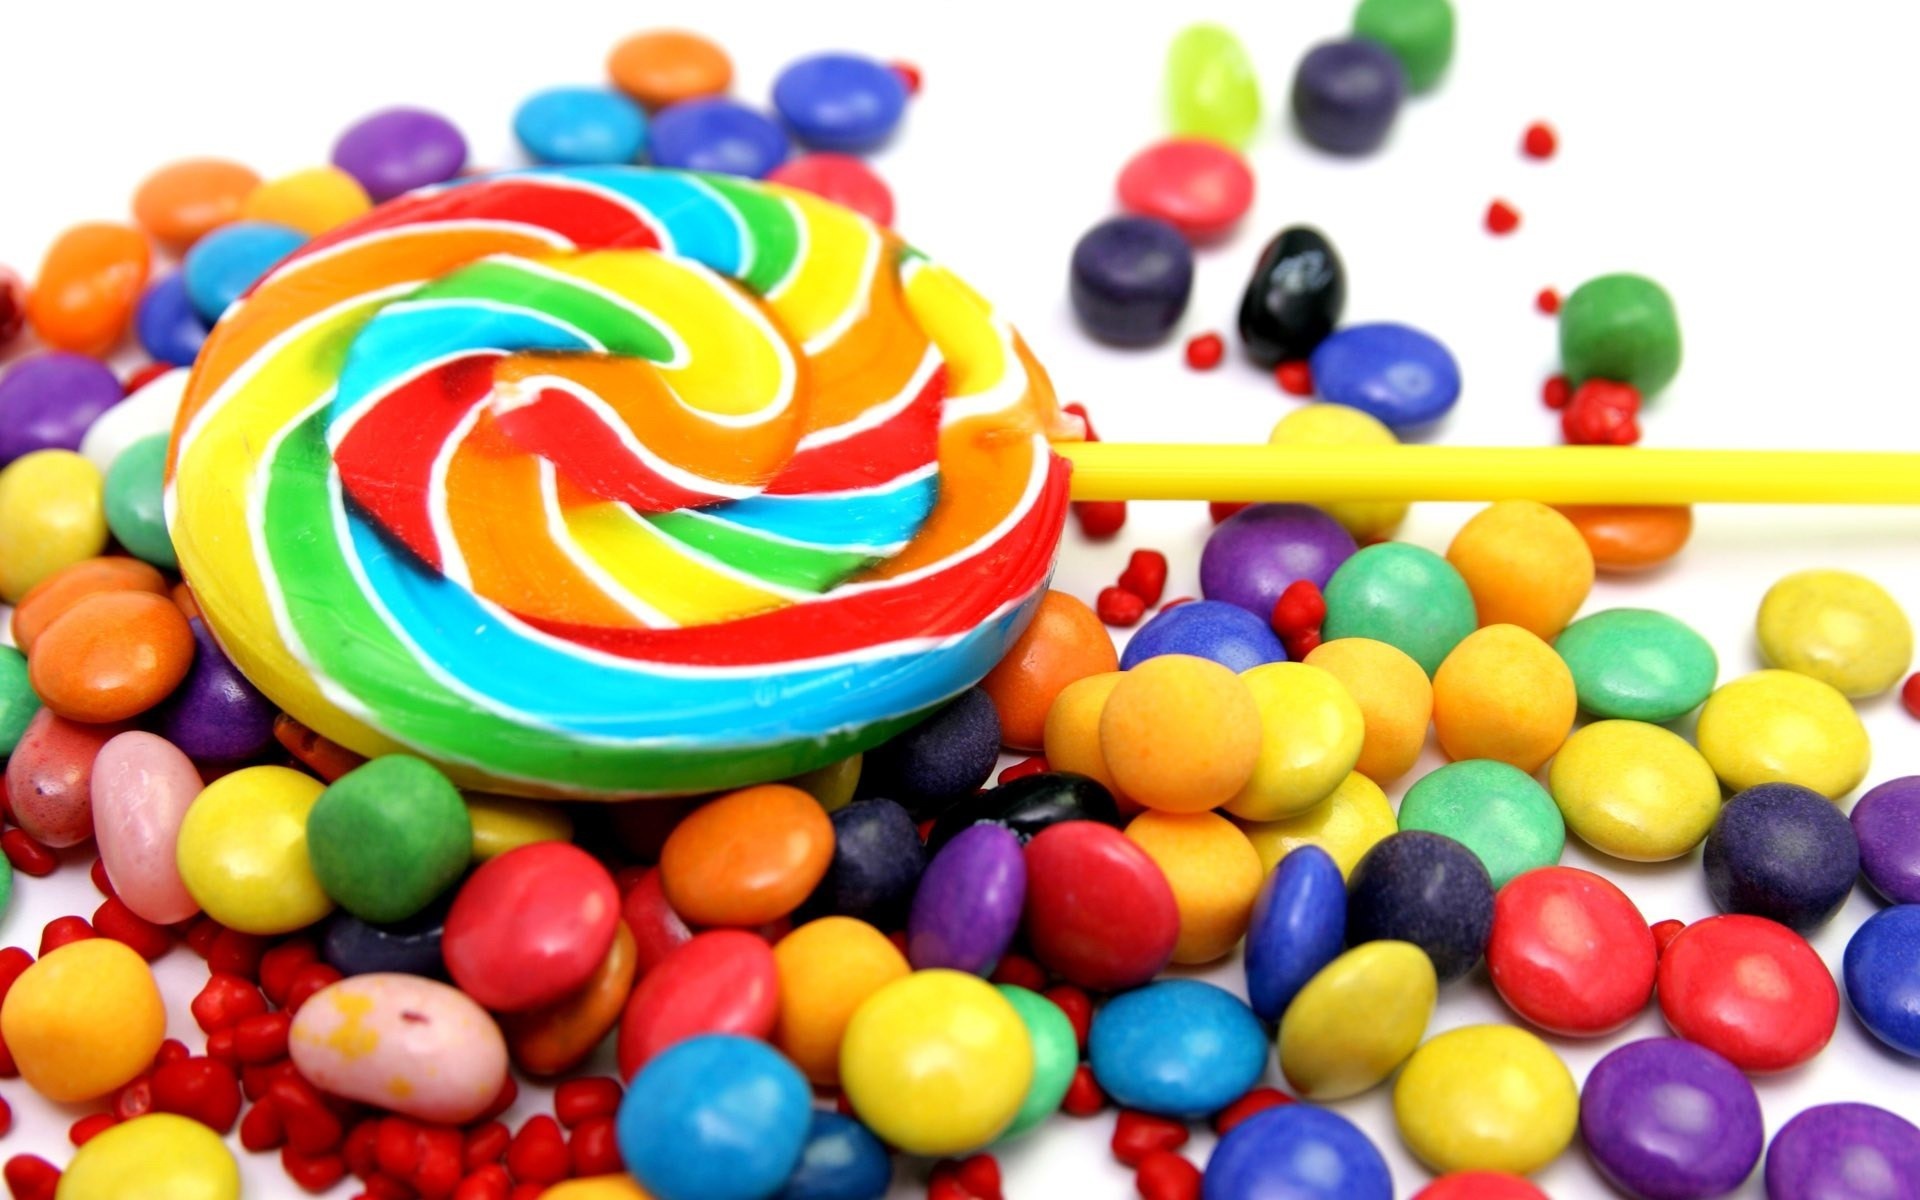 Candy-coated lollipop, Rainbow of colors, Fun and sweet, Tasty sugary treat, 1920x1200 HD Desktop